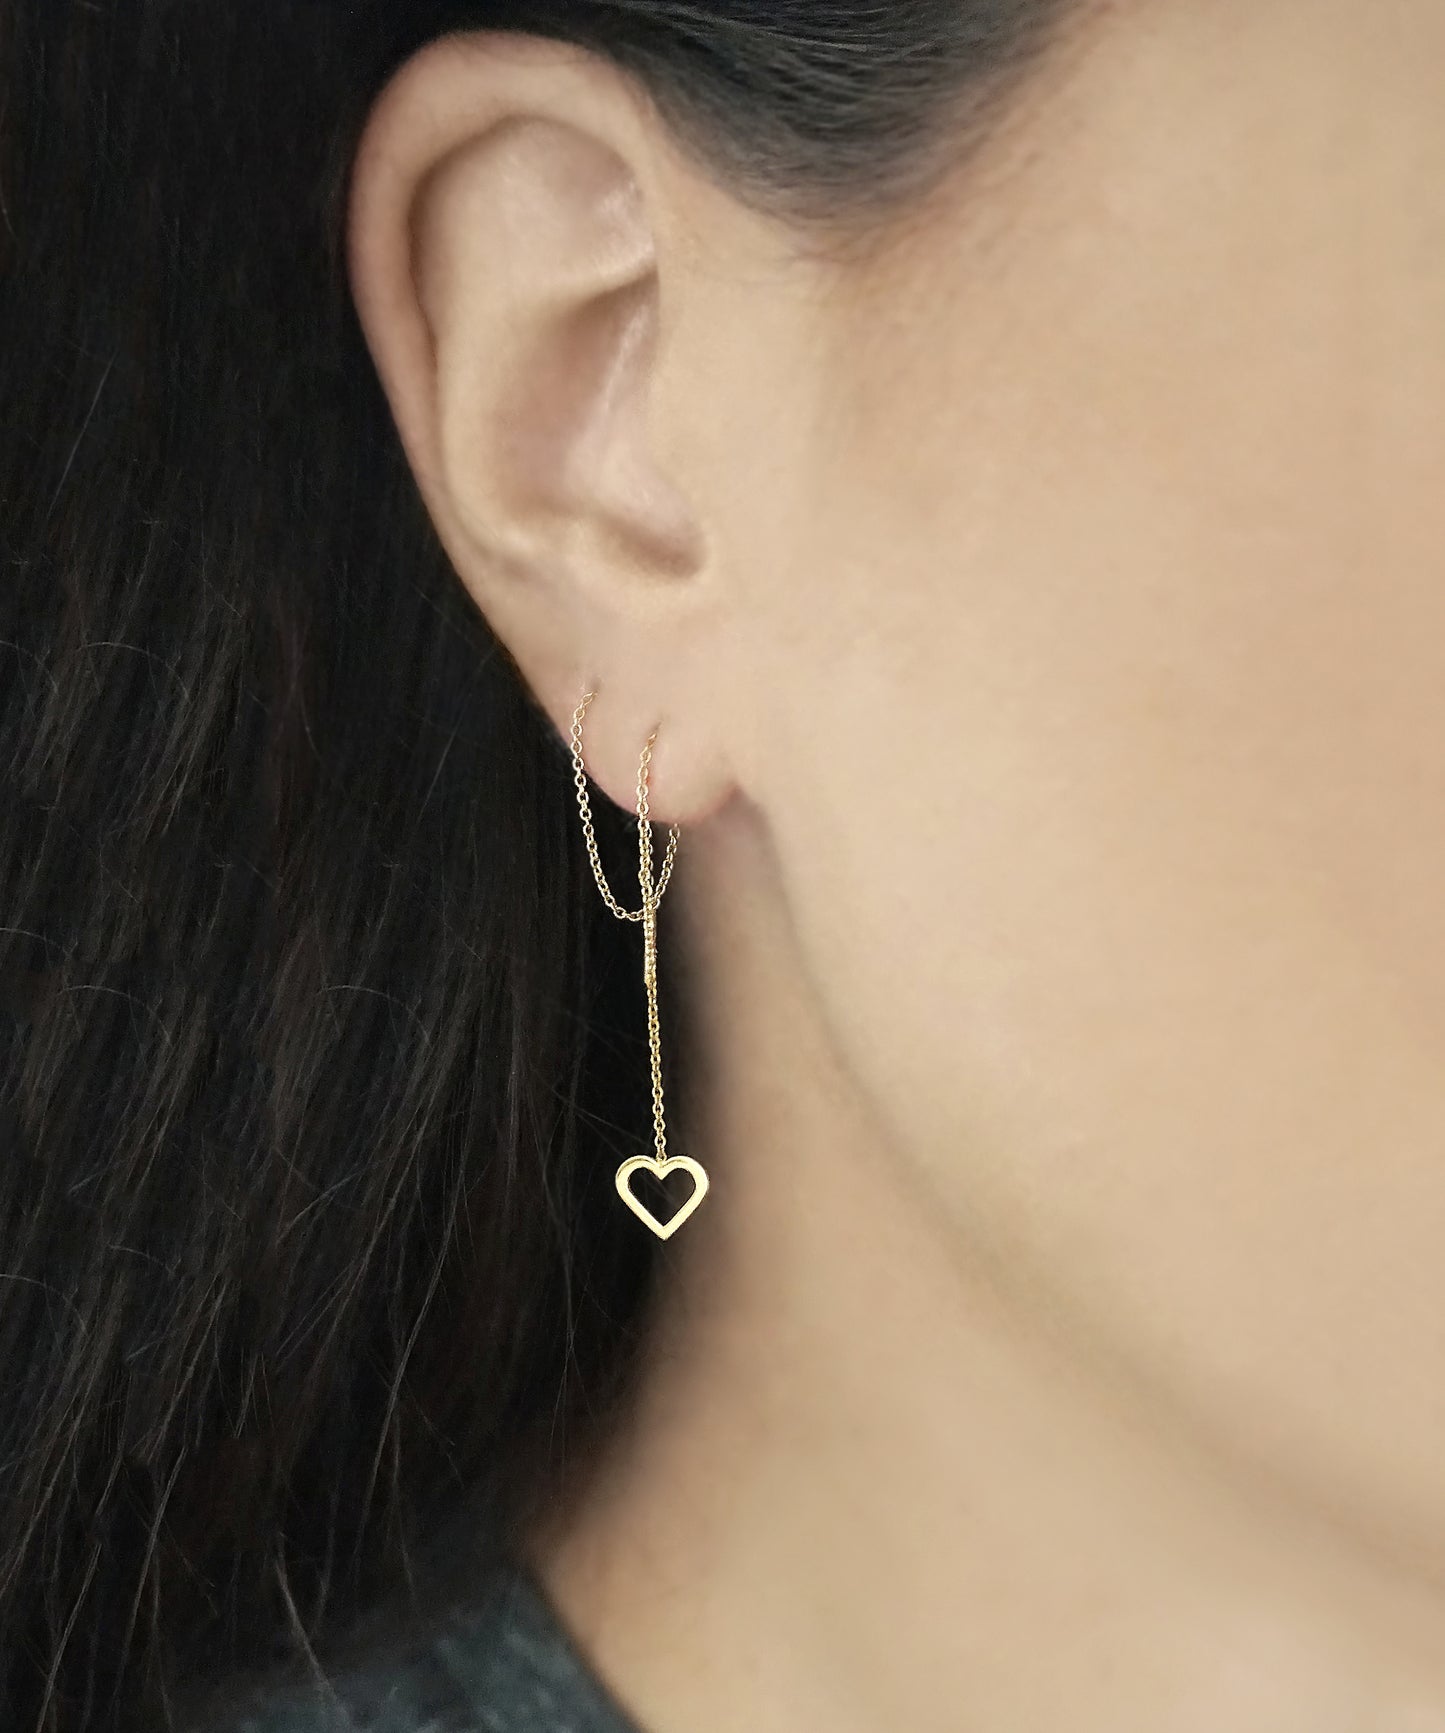 Solid Gold Threader Earrings with a Dainty Heart